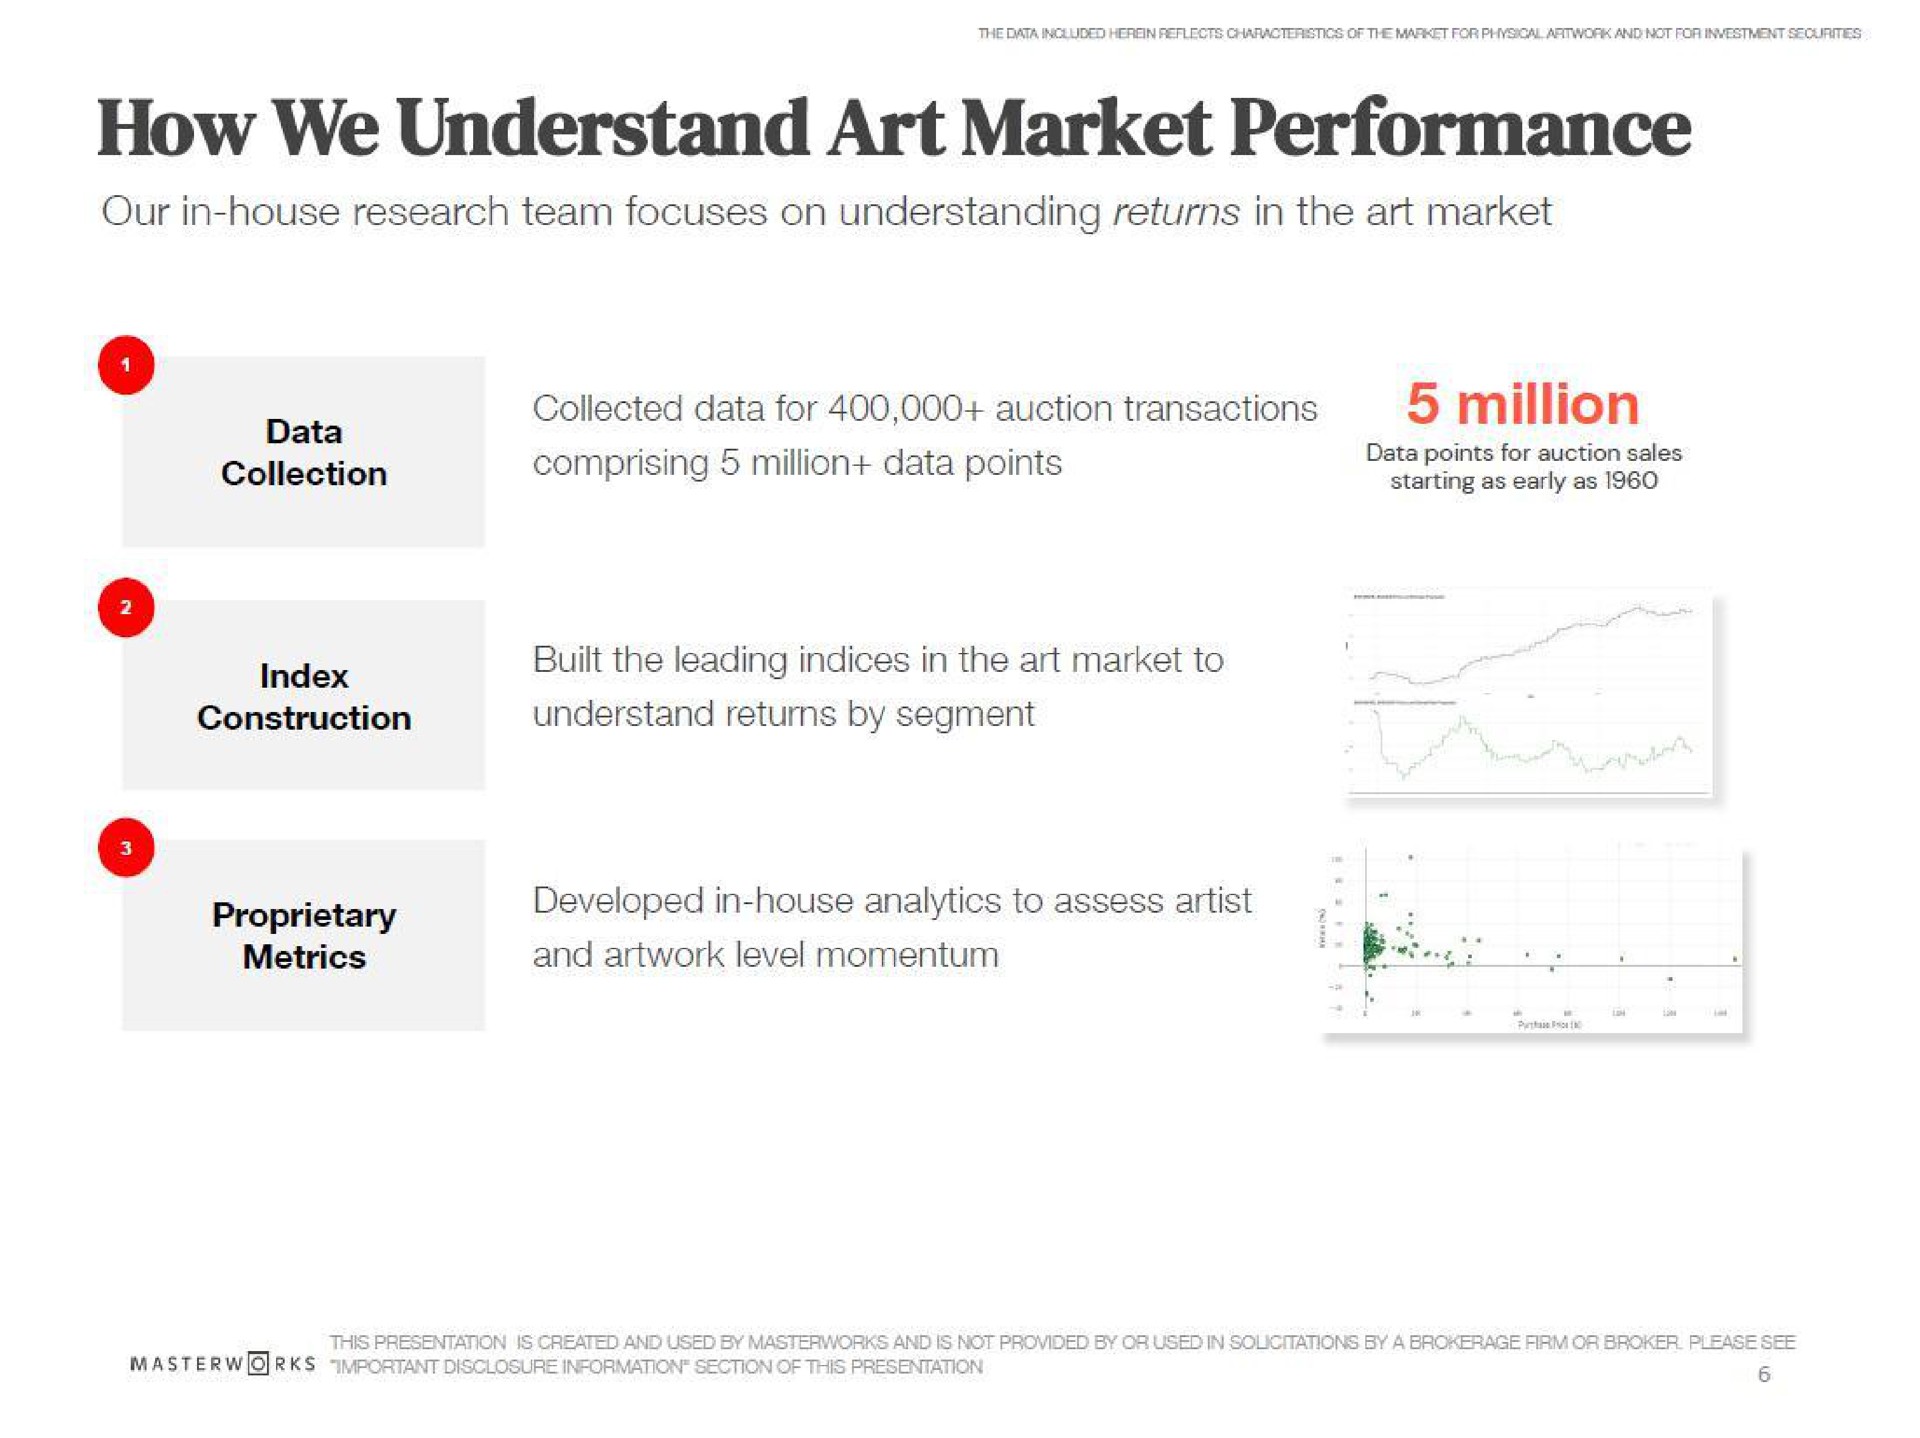 how we understand art market performance our in house research team focuses on understanding returns in the art market comprising million data points million built the leading indices in the art market to understand returns by segment developed in house analytics to assess artist and level momentum | Masterworks